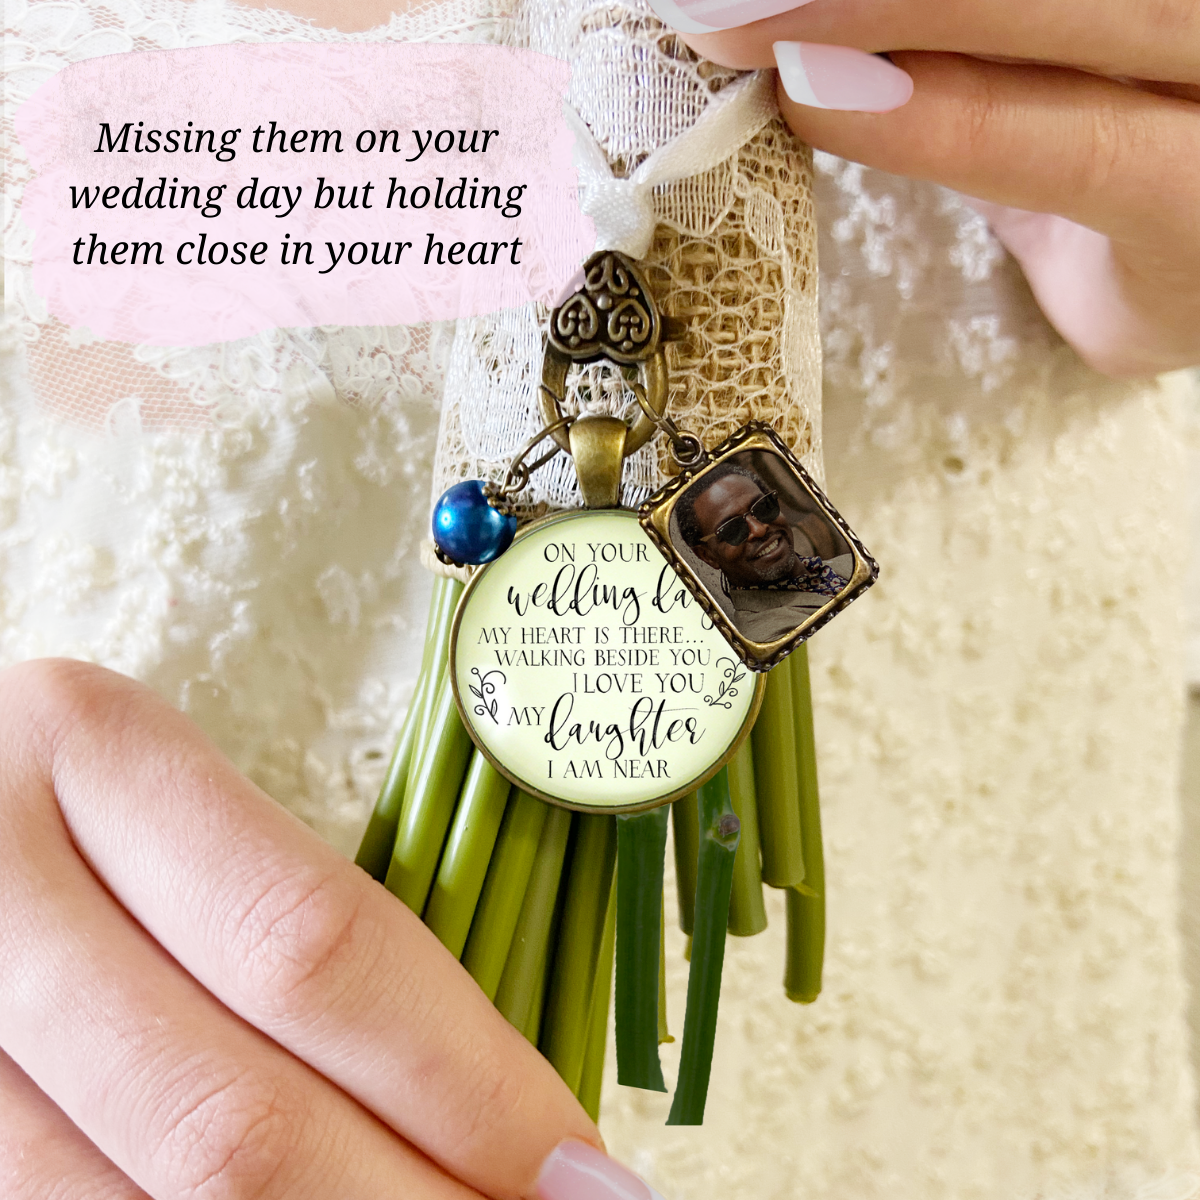 On Your Wedding Day MY Heart Is There Walking Beside You DAUGHTER - BRONZE - CREAM - BLUE BEAD